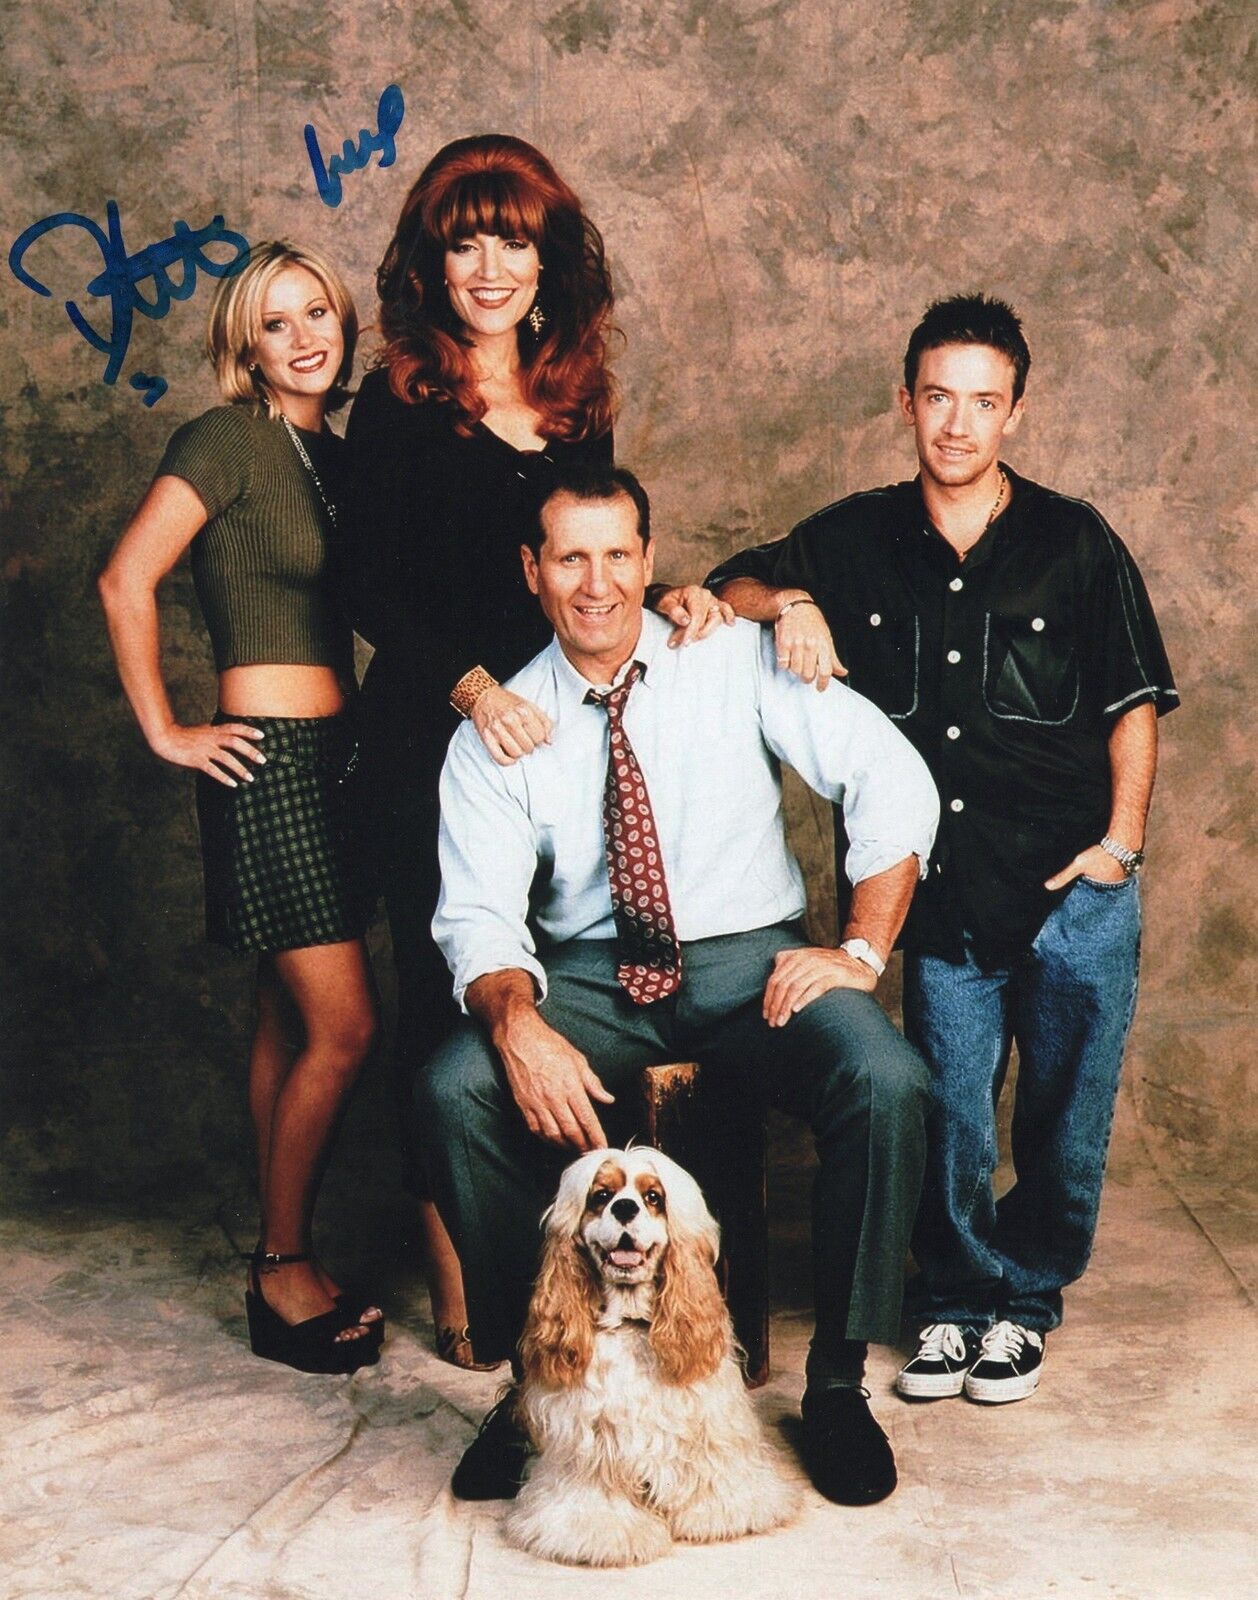 David Faustino Married With Children Bud Bundy Signed 8x10 Photo Poster painting w/COA #1